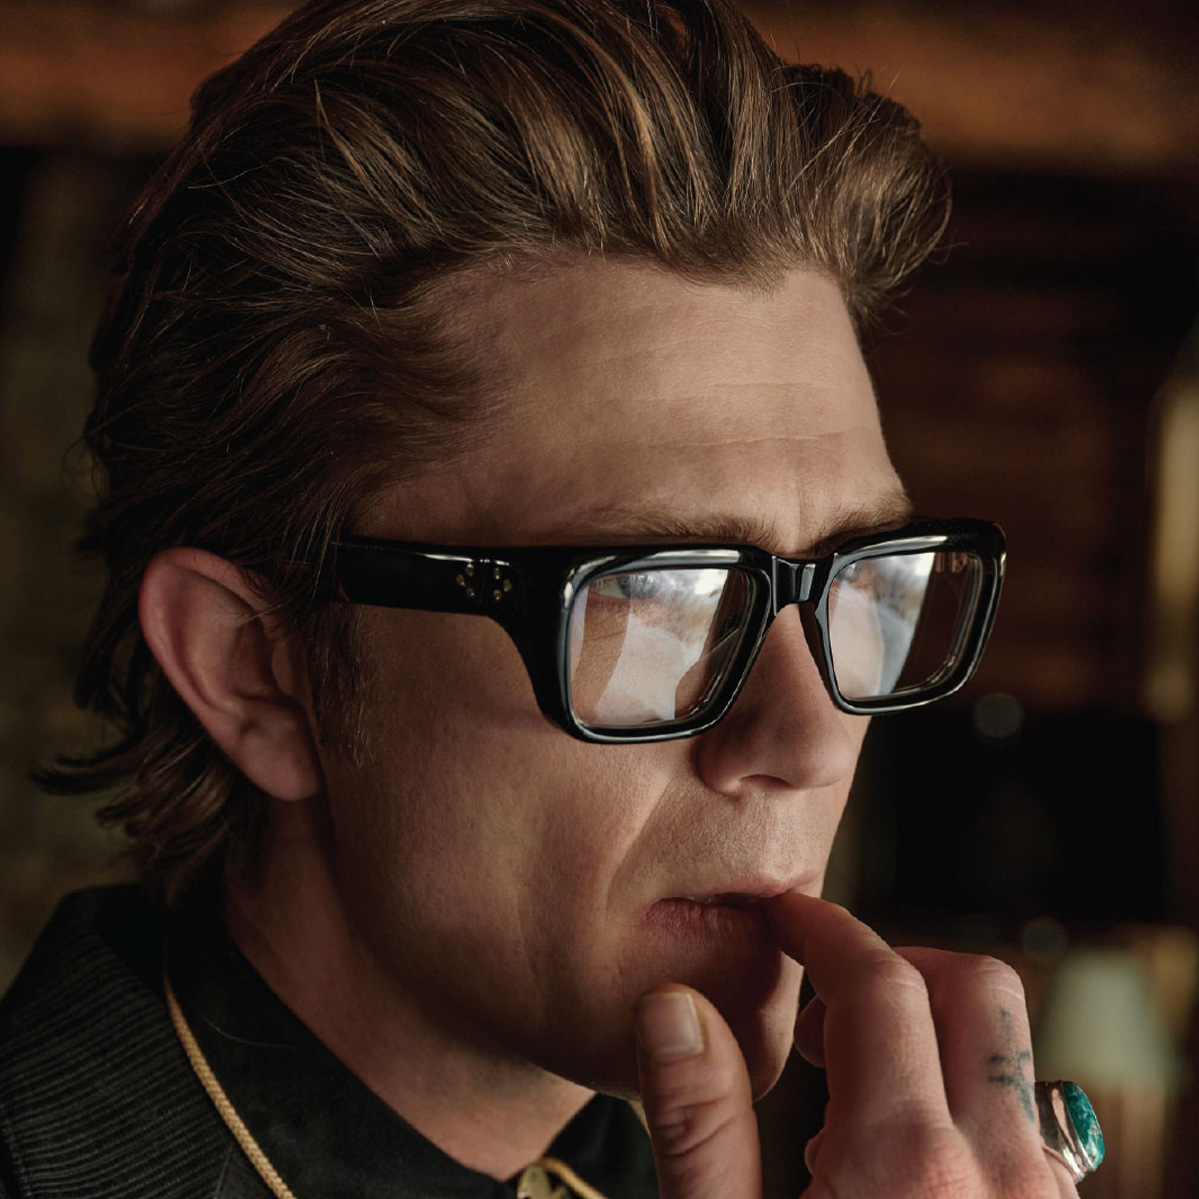 Jacques marie mage. Jacques Marie Mage дизайнер. Jacques Marie Mage очки. Jacques Marie Mage Eyewear "Hemmings". Jacques Marie Mage Tarantino movie.